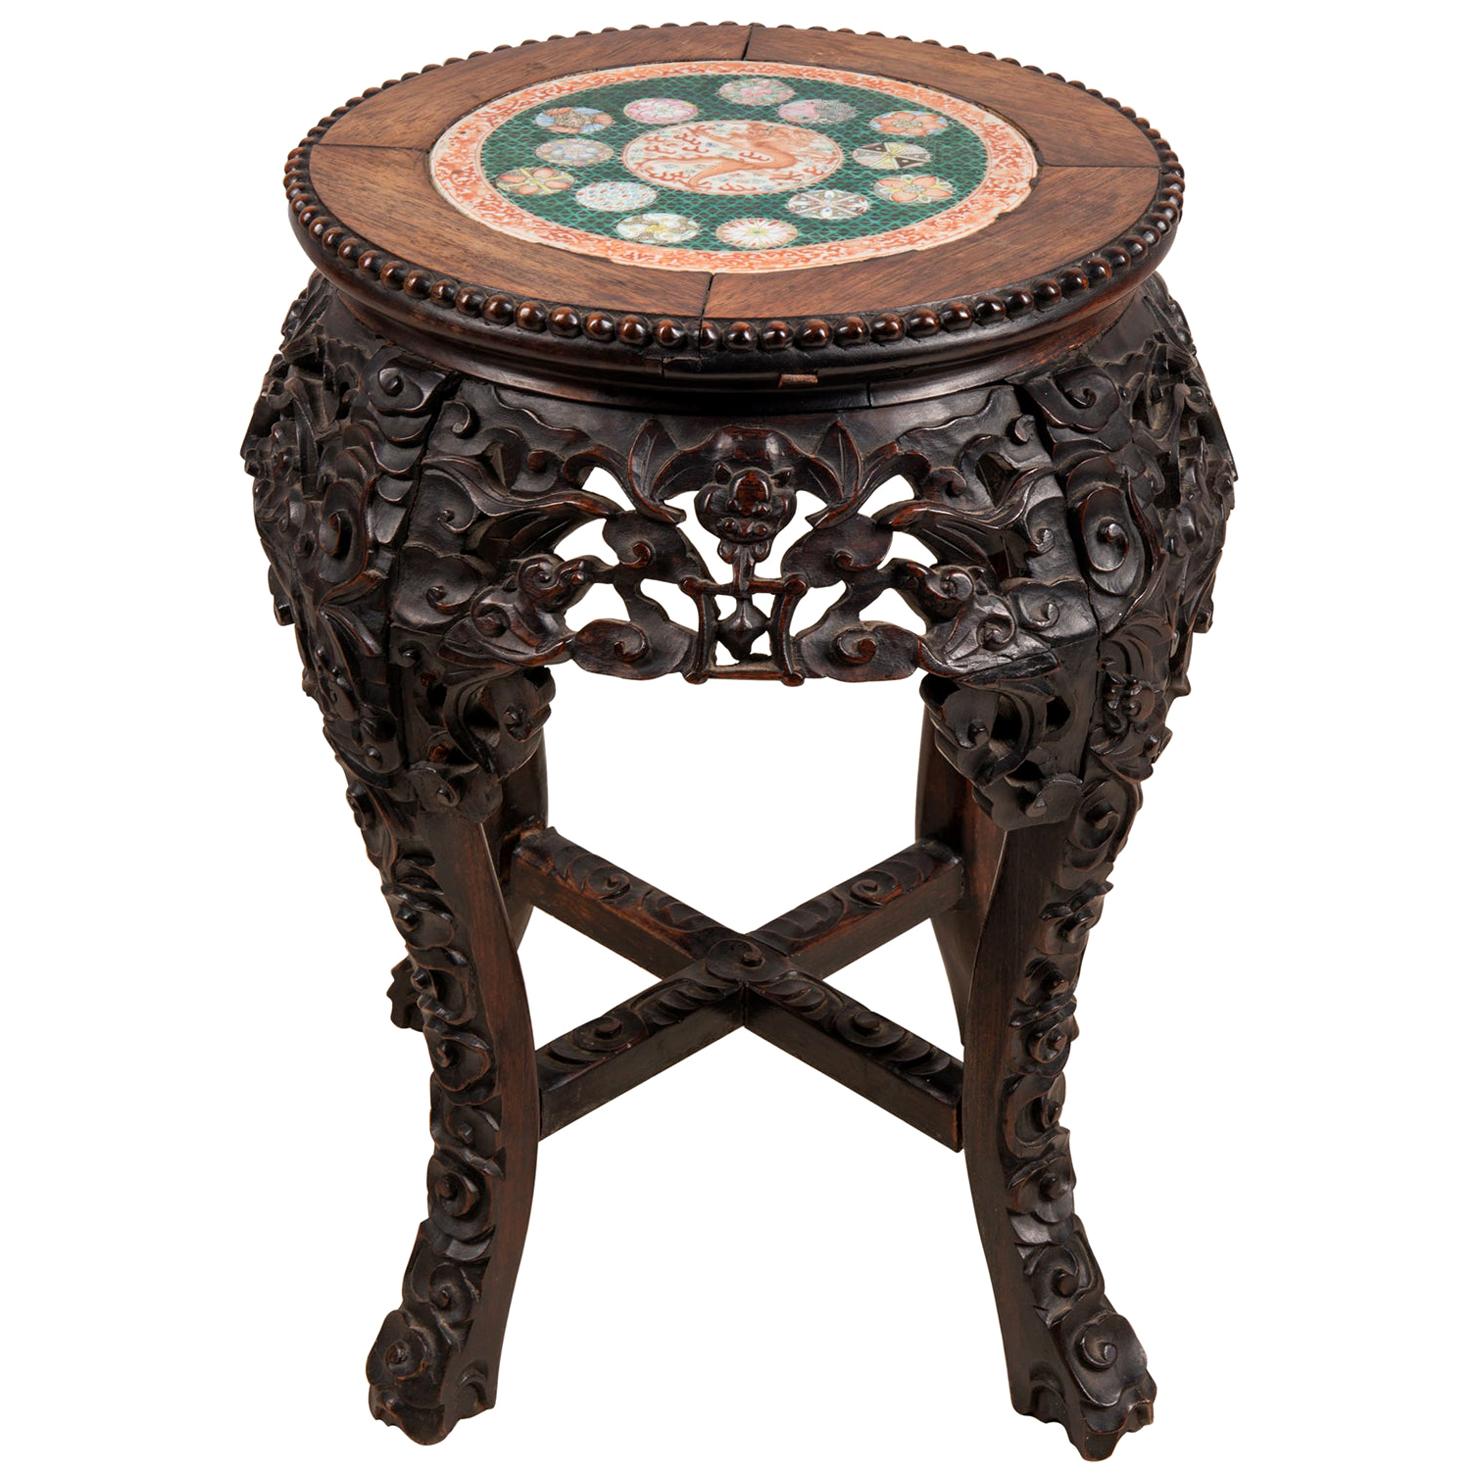 19th Century Chinese Hardwood Stand with Inset Famille Verte Plate